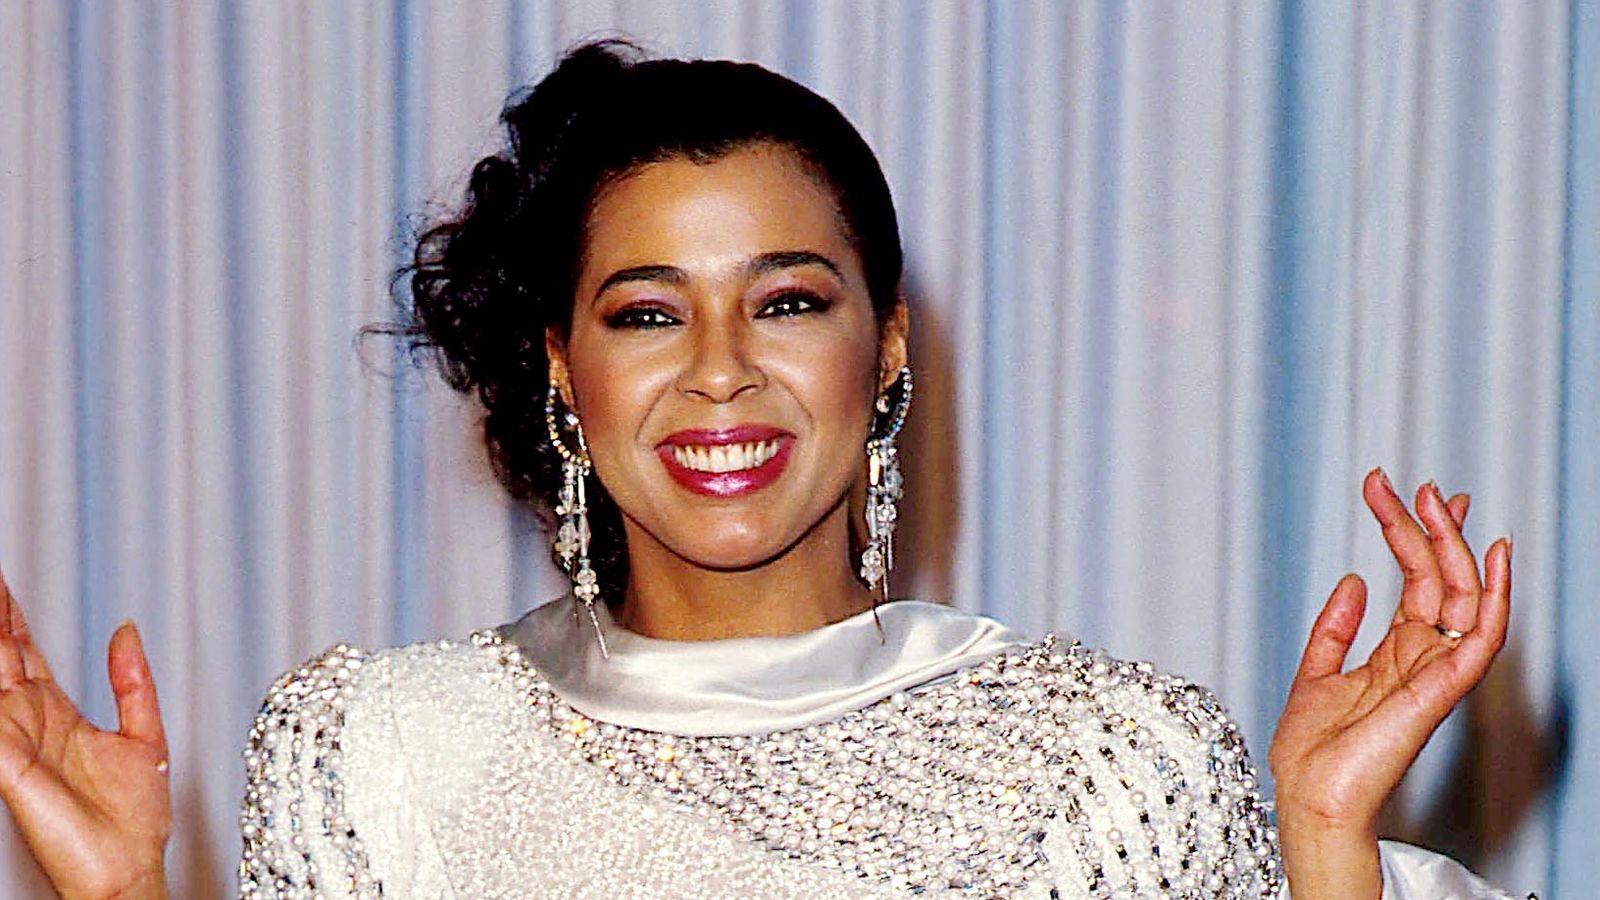 Flashdance and Fame singer Irene Cara dies aged 63